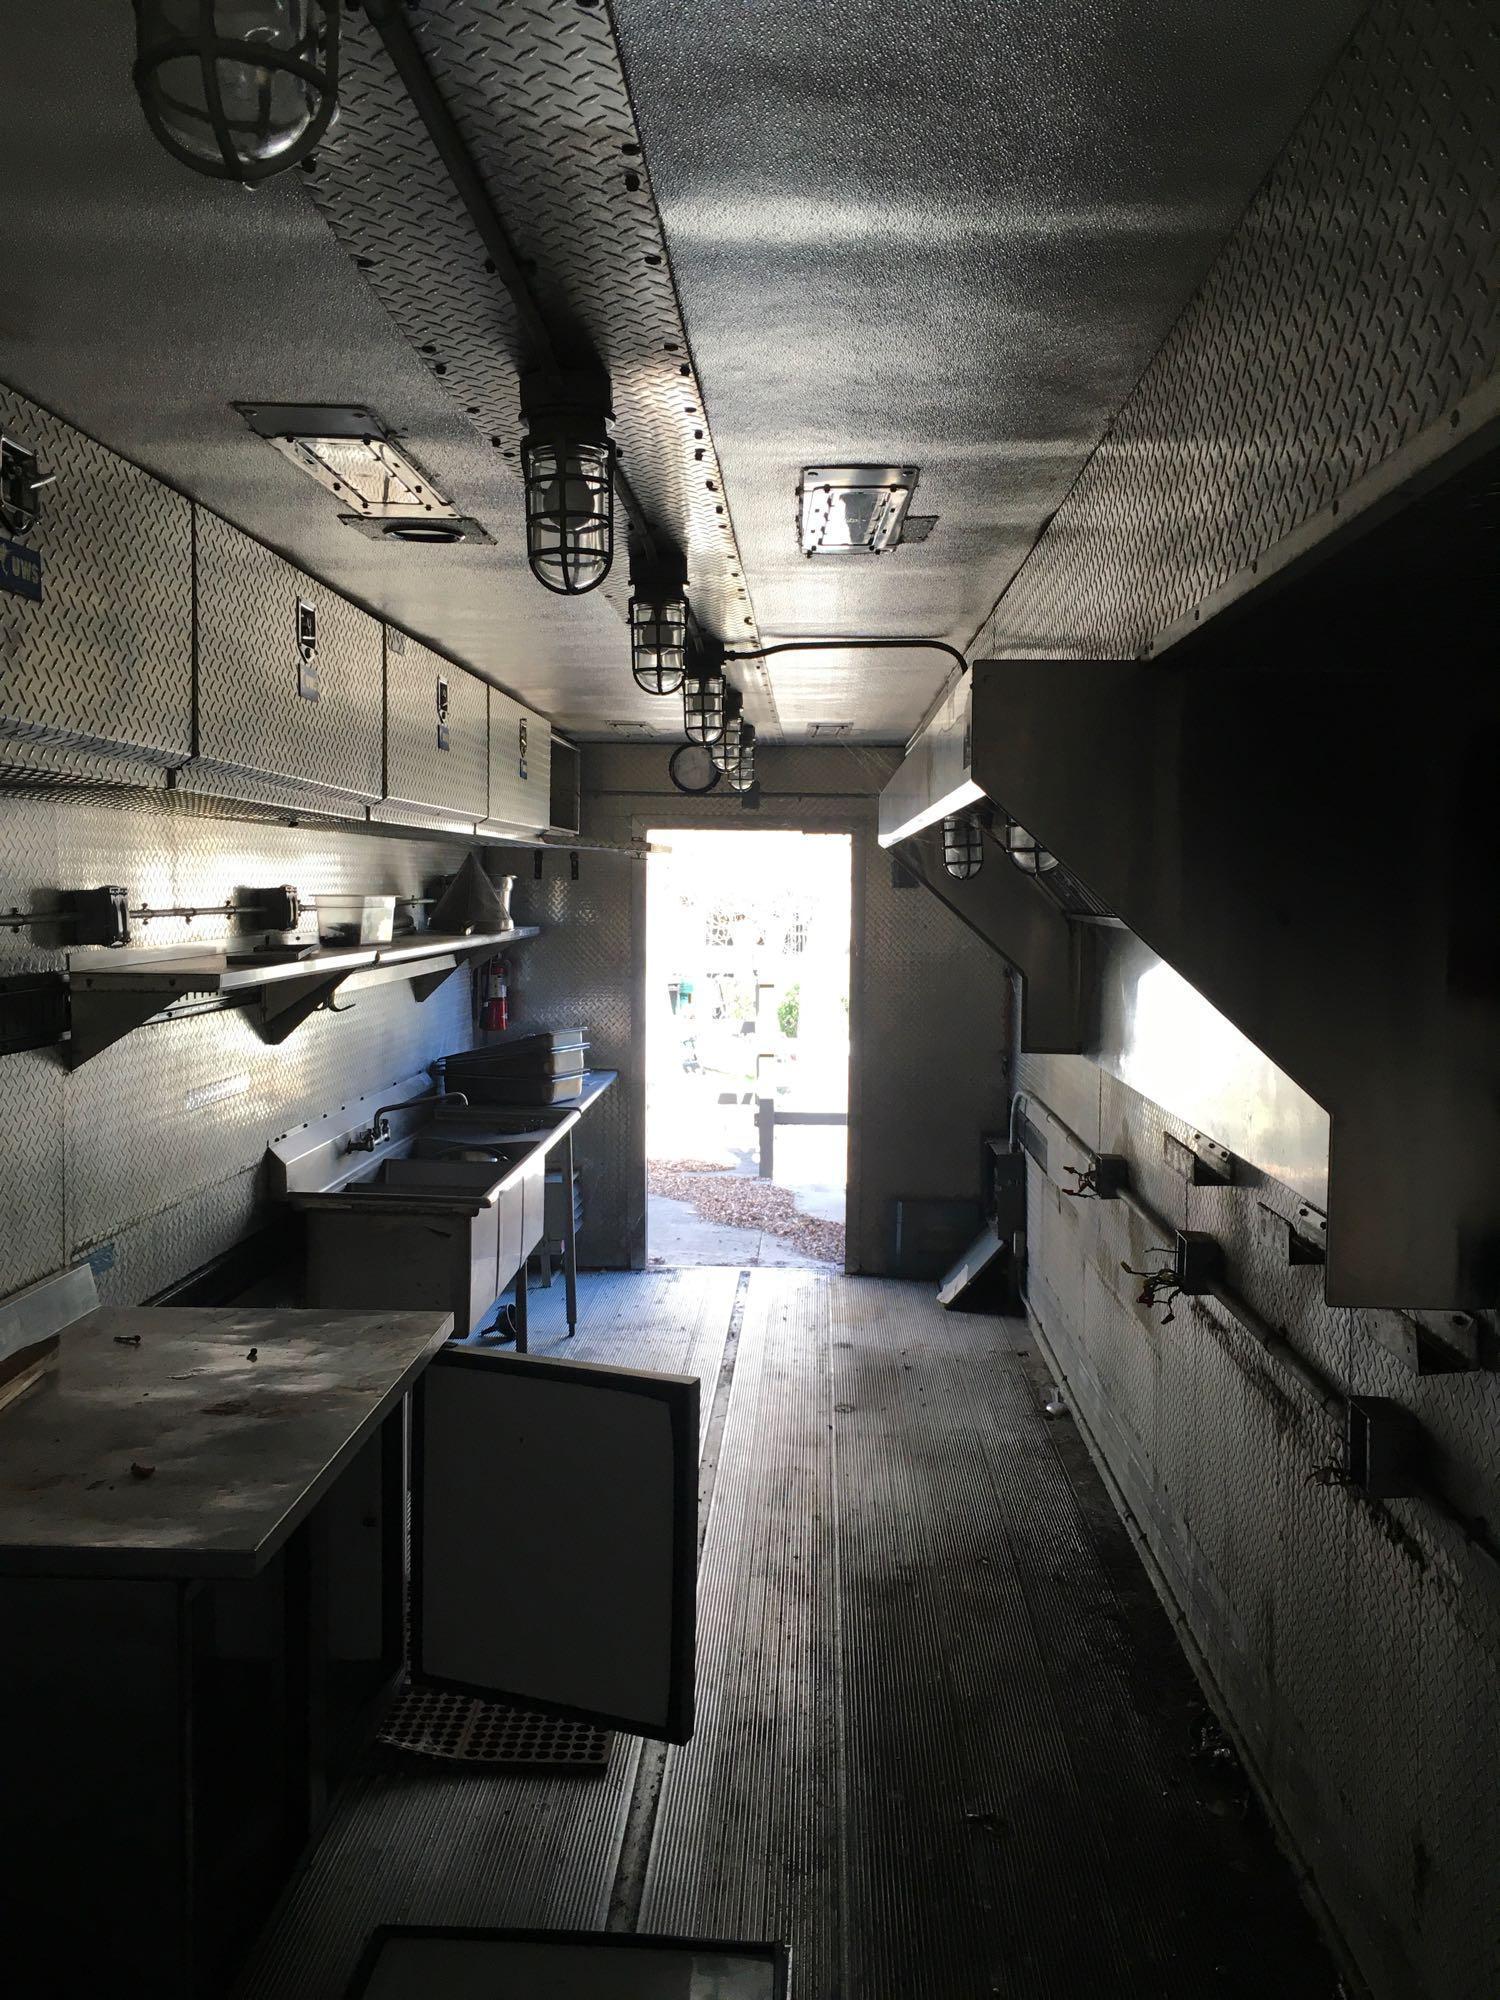 1999 36' Mobile 5th wheel kitchen trailer. Over 80 photos !! Sold on Bill of Sale Only